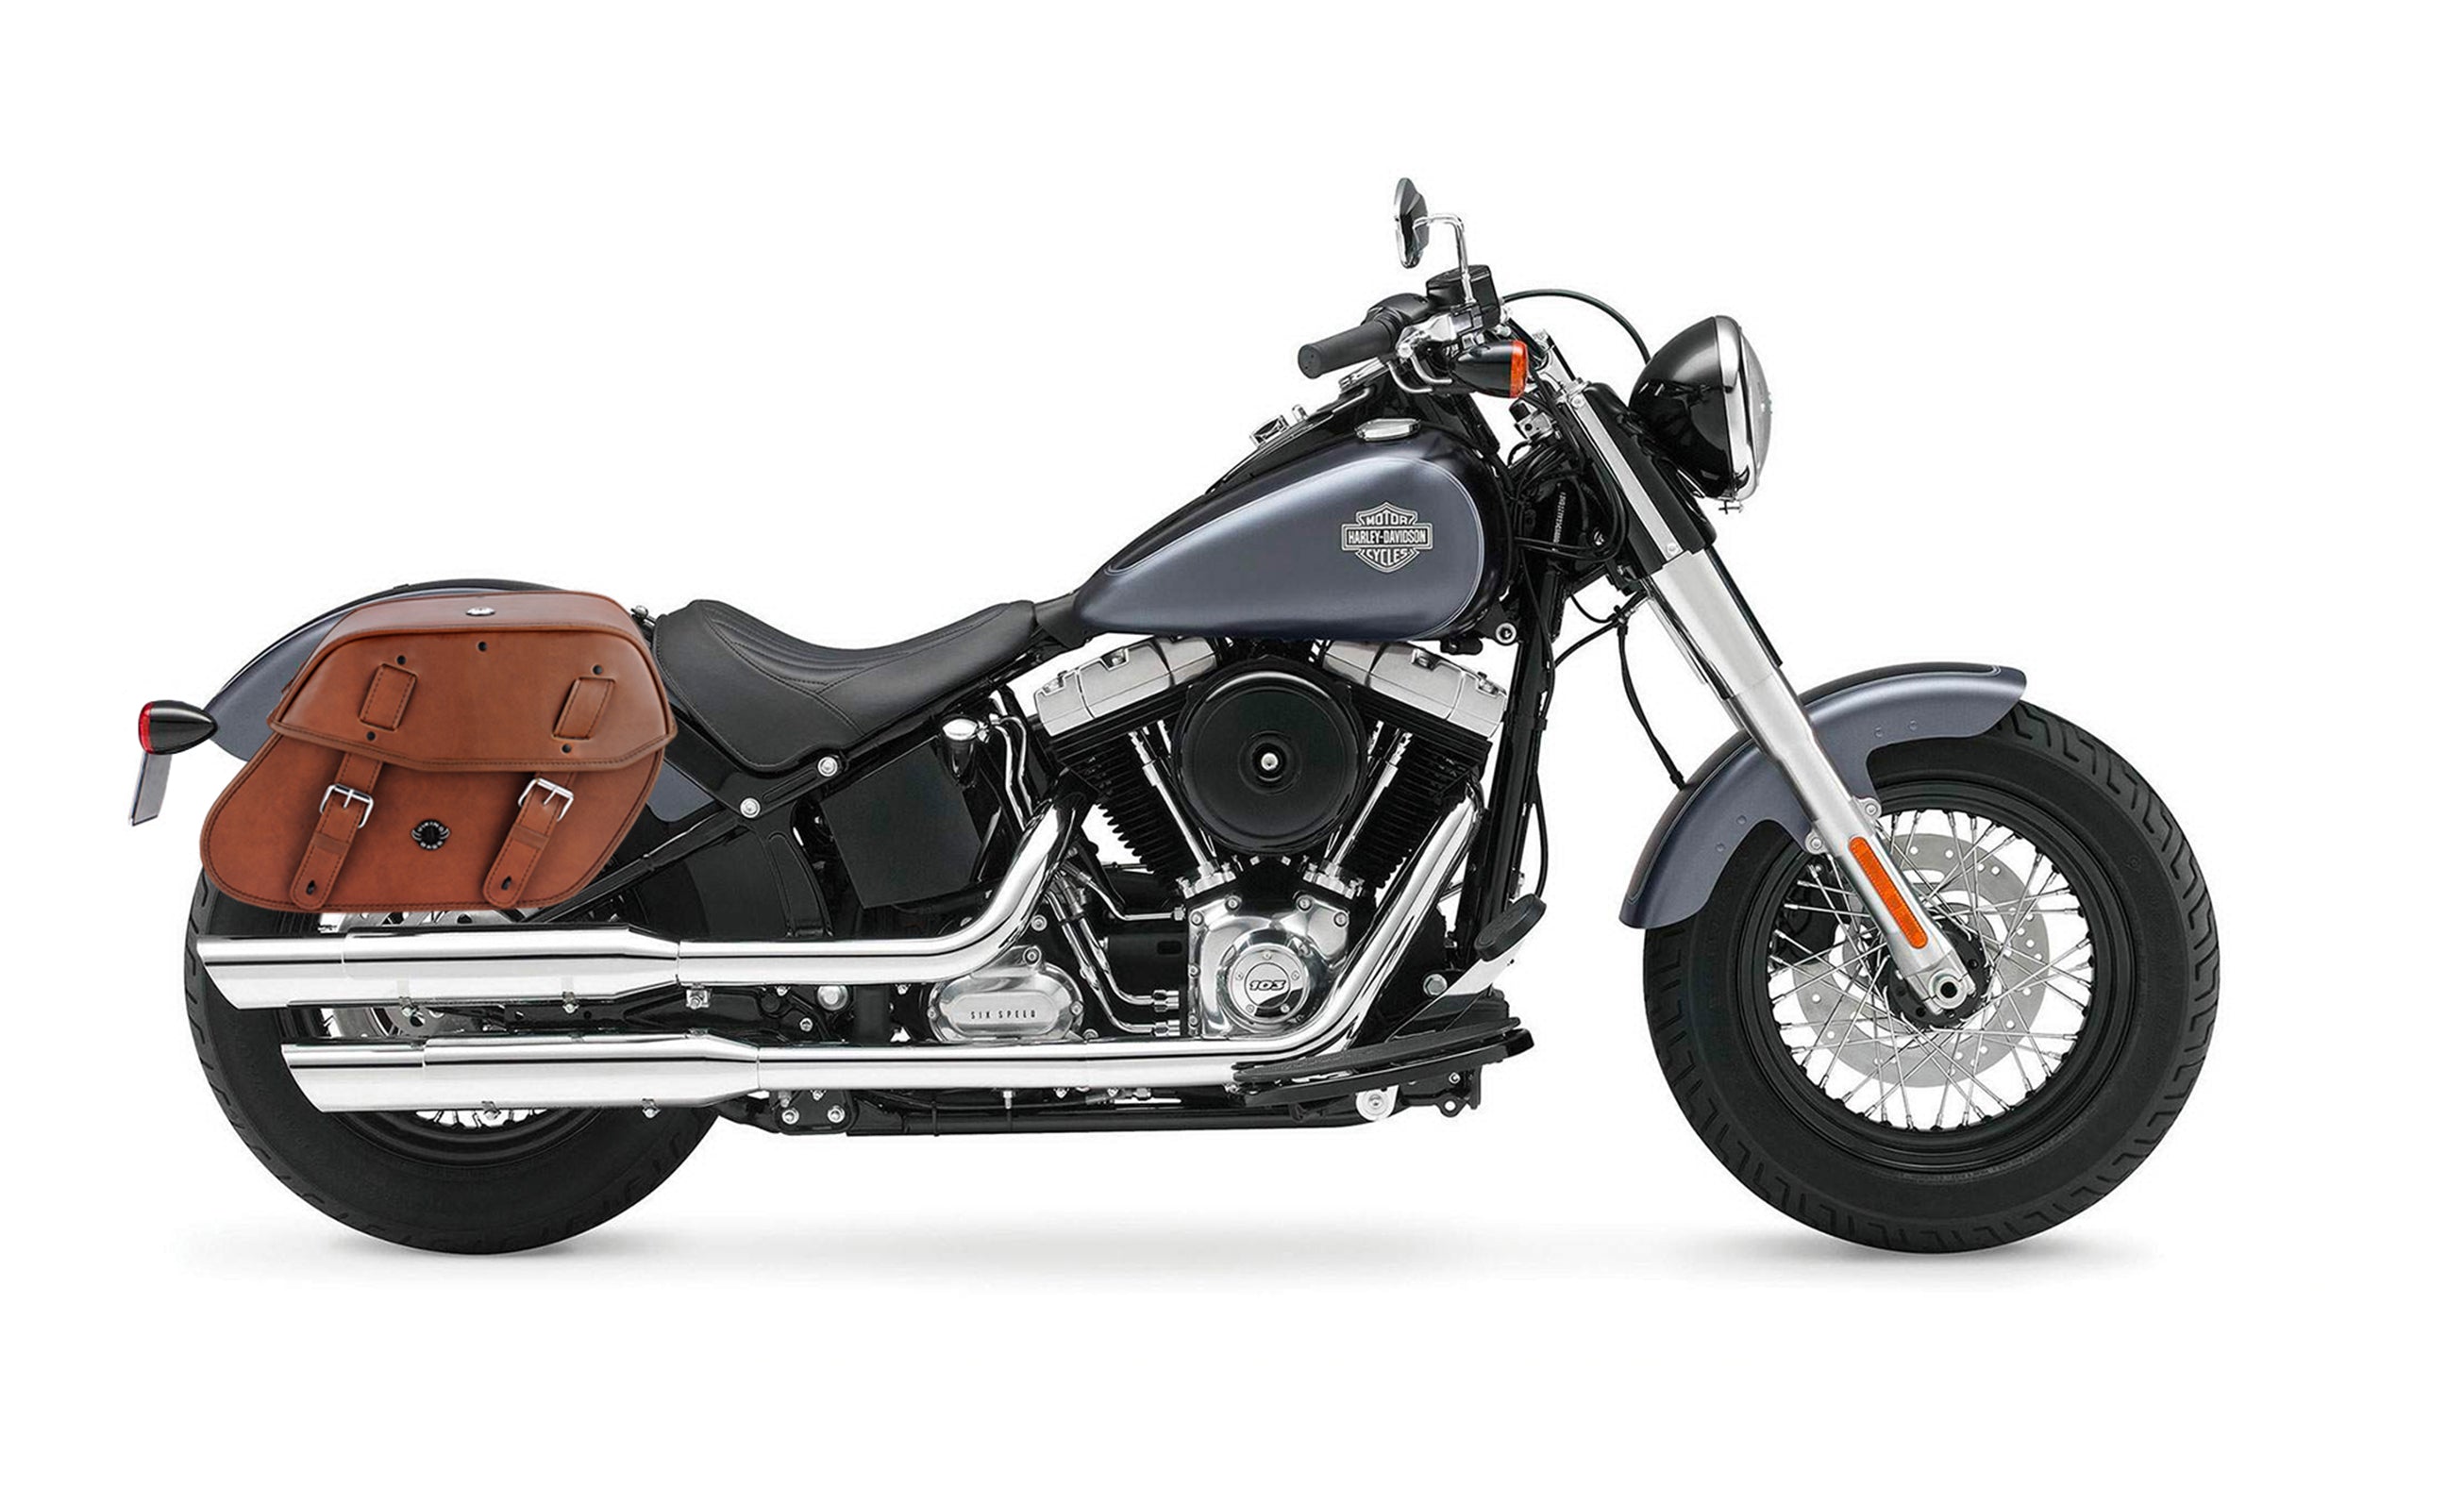 24L - Odin Brown Large Leather Motorcycle Saddlebags for Harley Softail Slim FLS on Bike Photo @expand